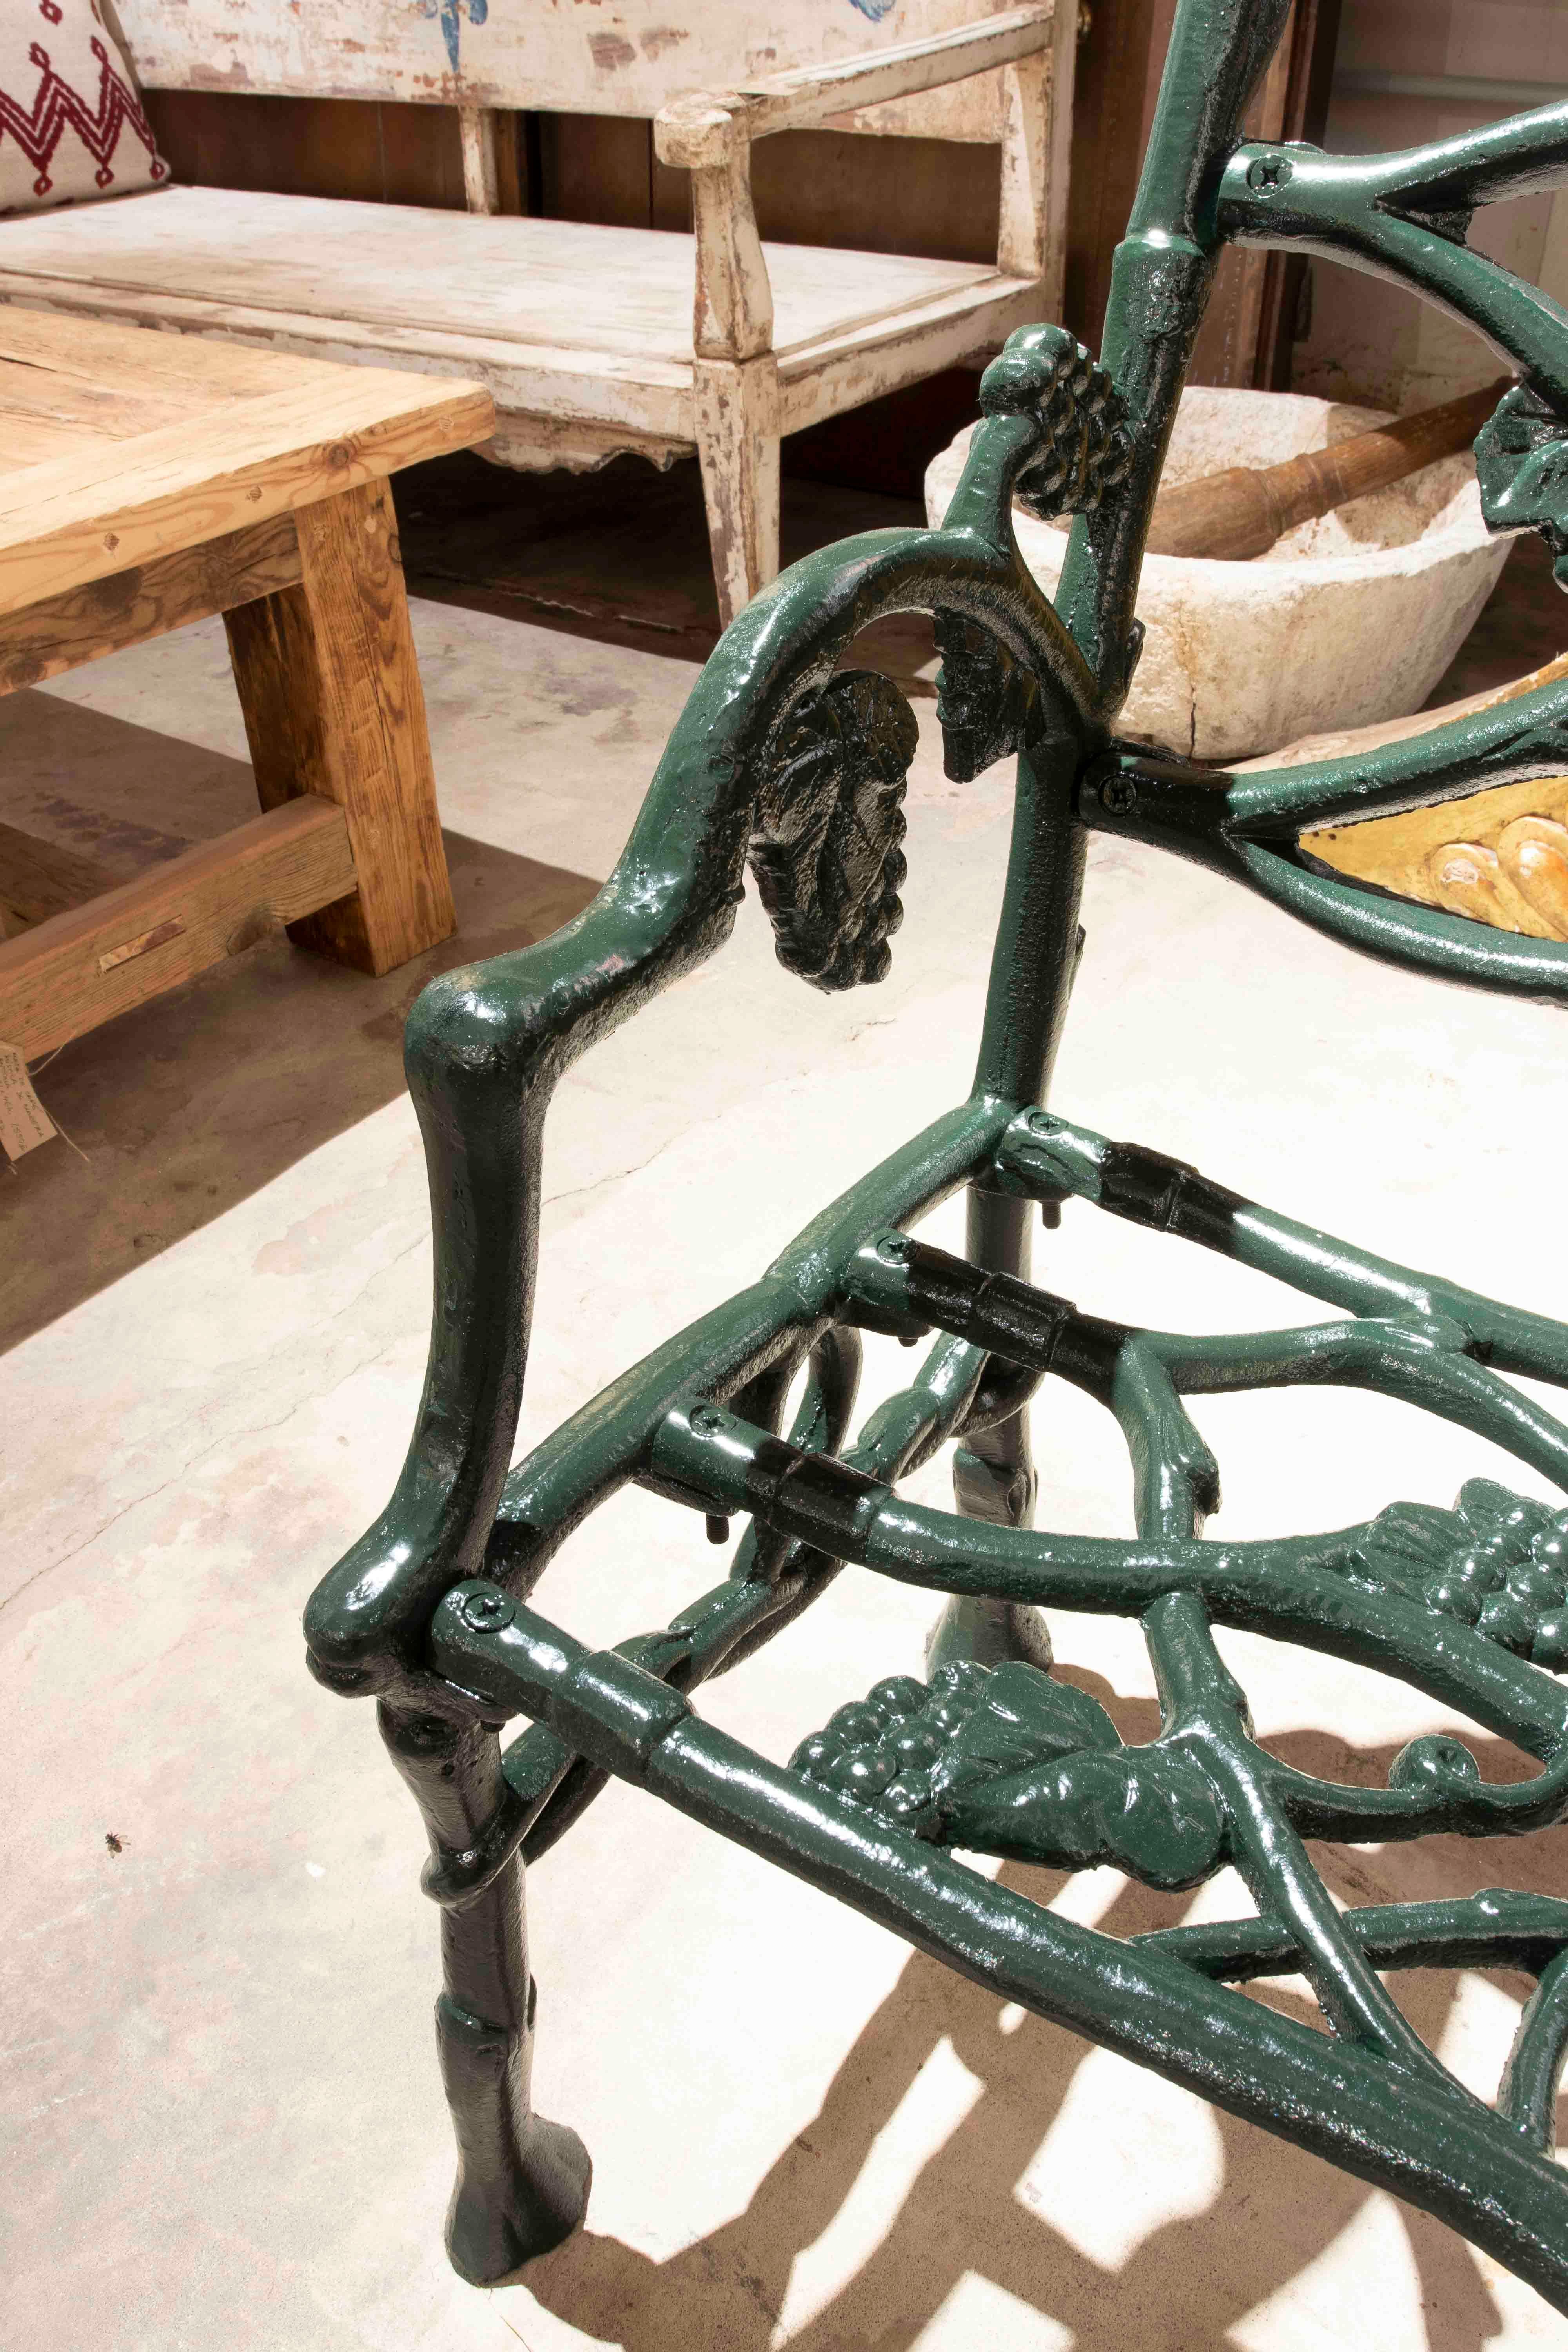 French Iron Garden Bench with Grapes Decoration on the Backrest